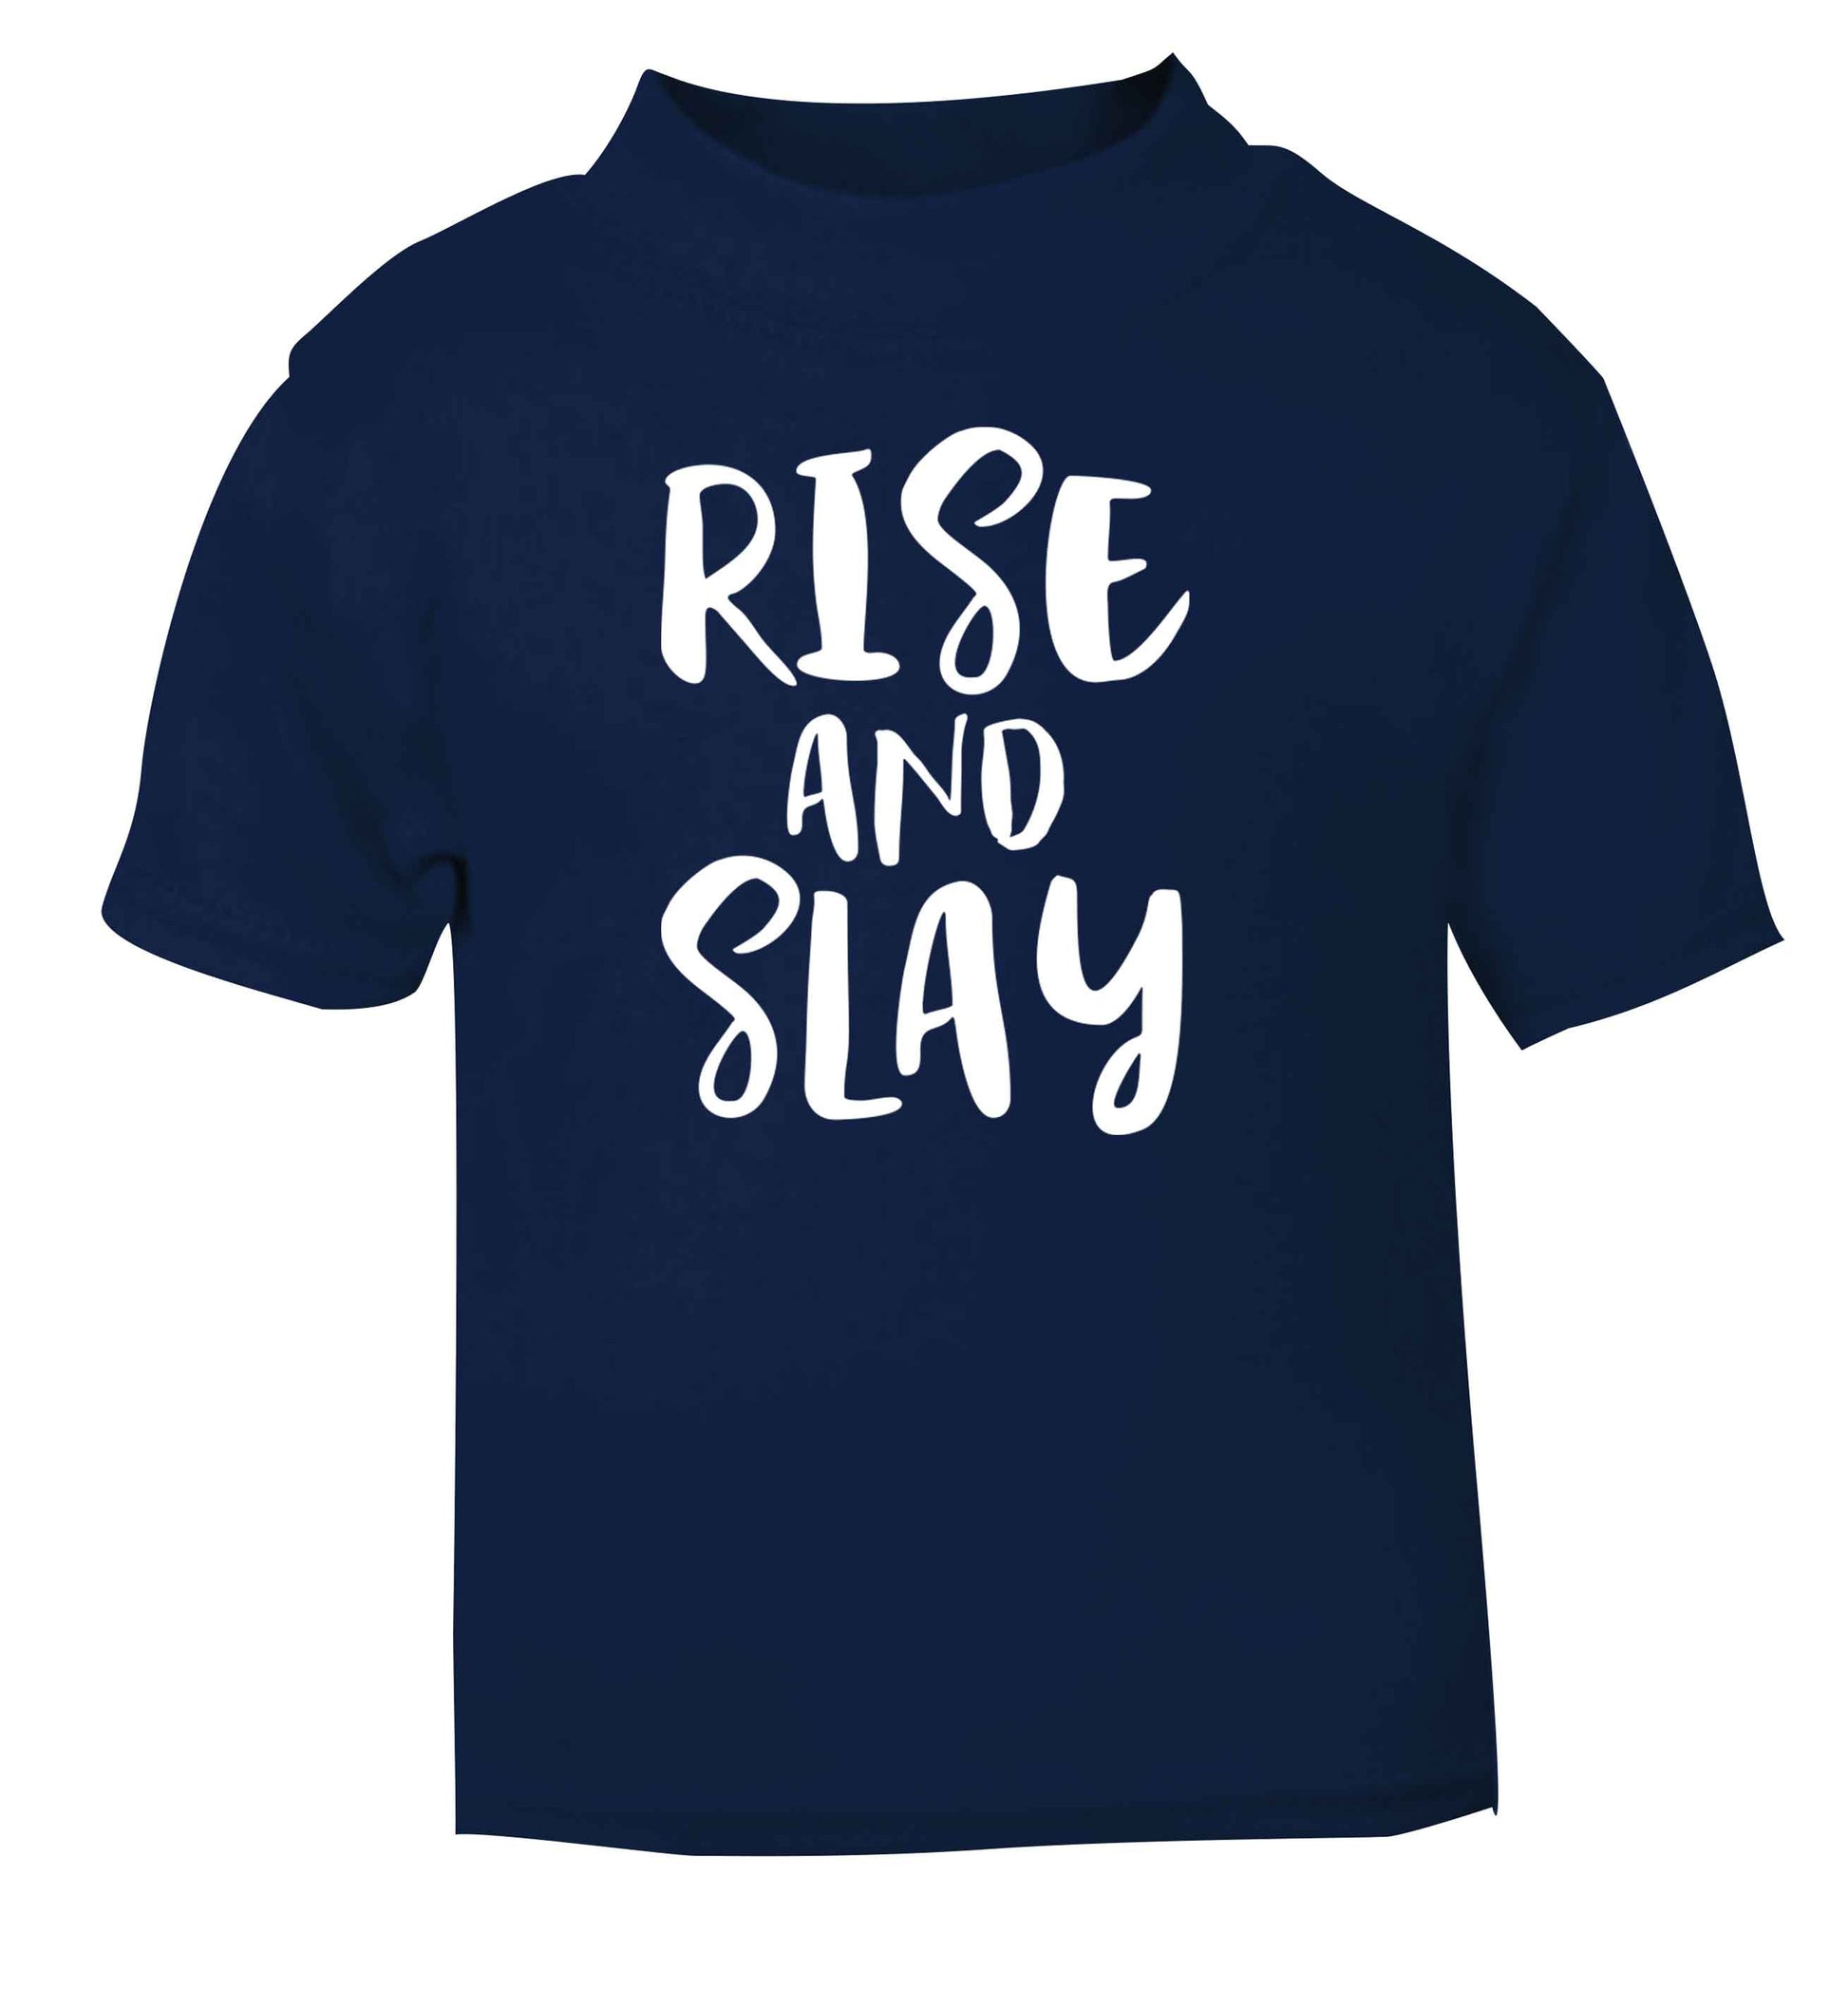 Rise and slay navy Baby Toddler Tshirt 2 Years